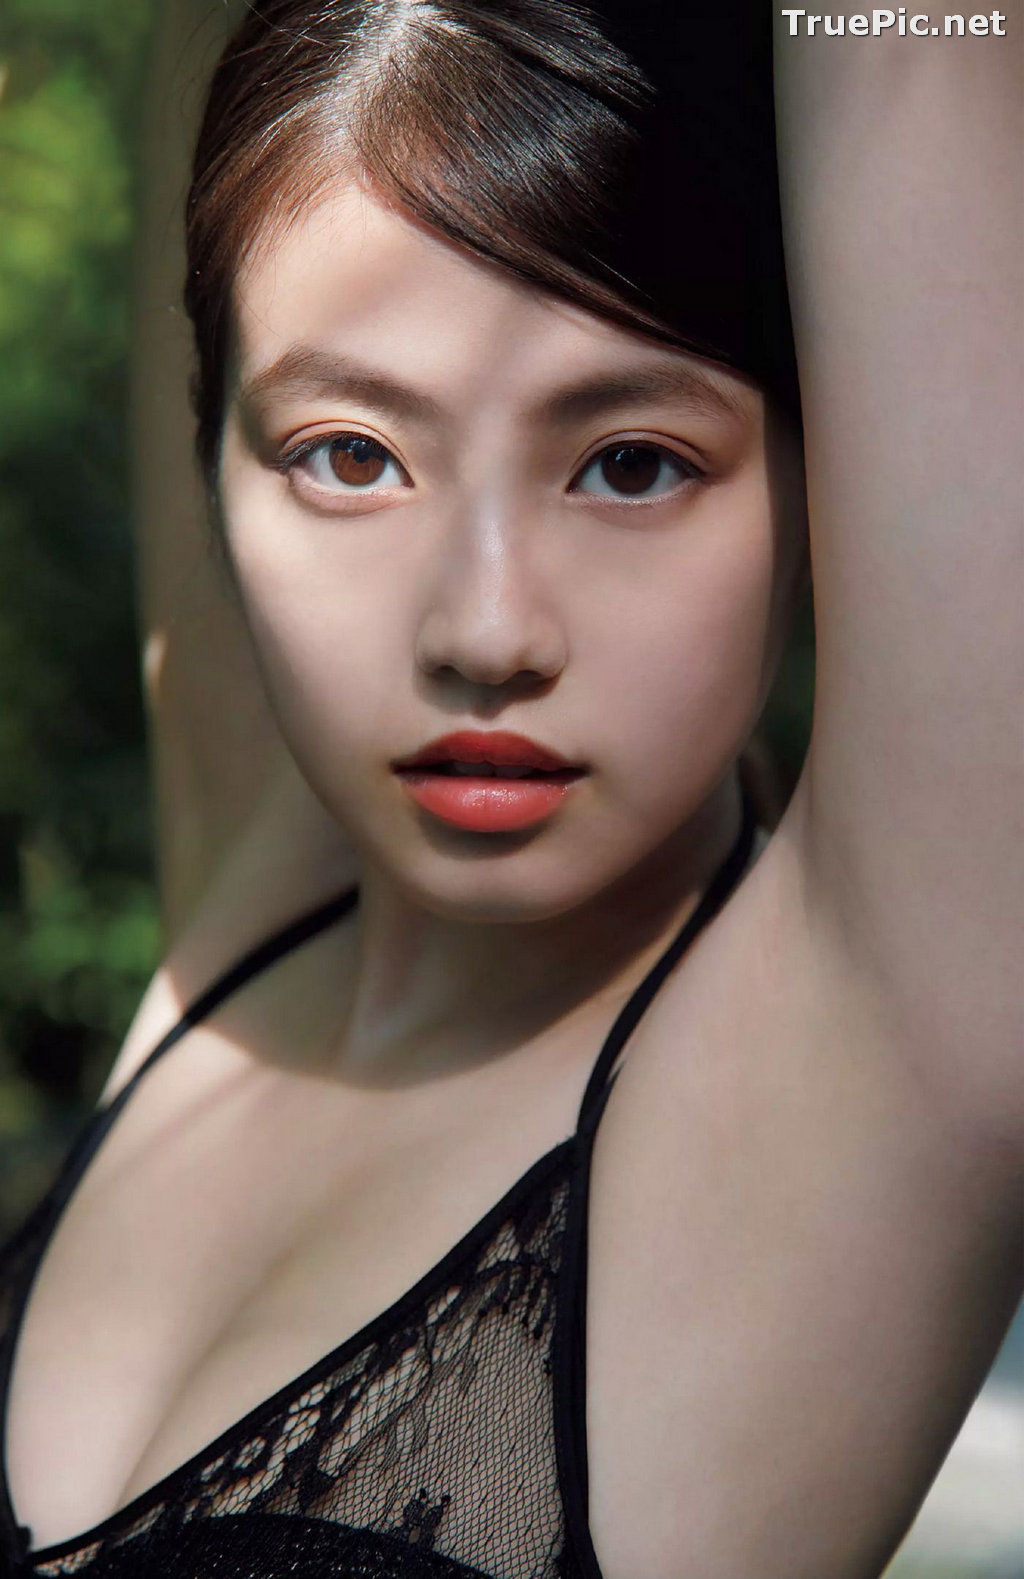 Image Japanese Actress and Model - Mio Imada (今田美櫻) - Sexy Picture Collection 2020 - TruePic.net - Picture-65